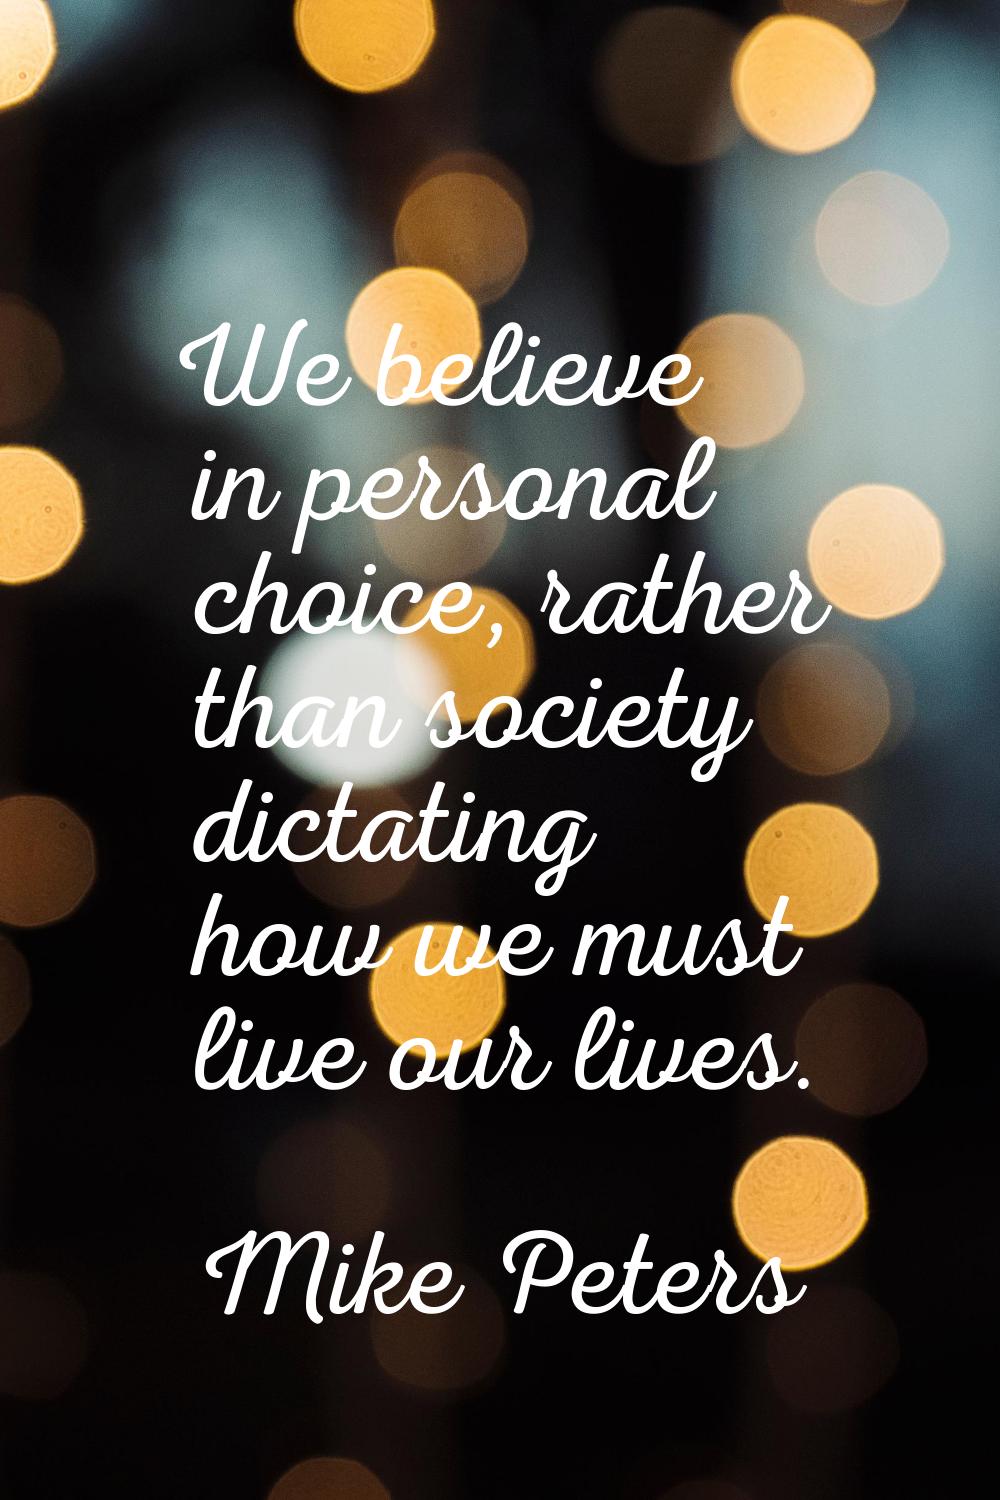 We believe in personal choice, rather than society dictating how we must live our lives.